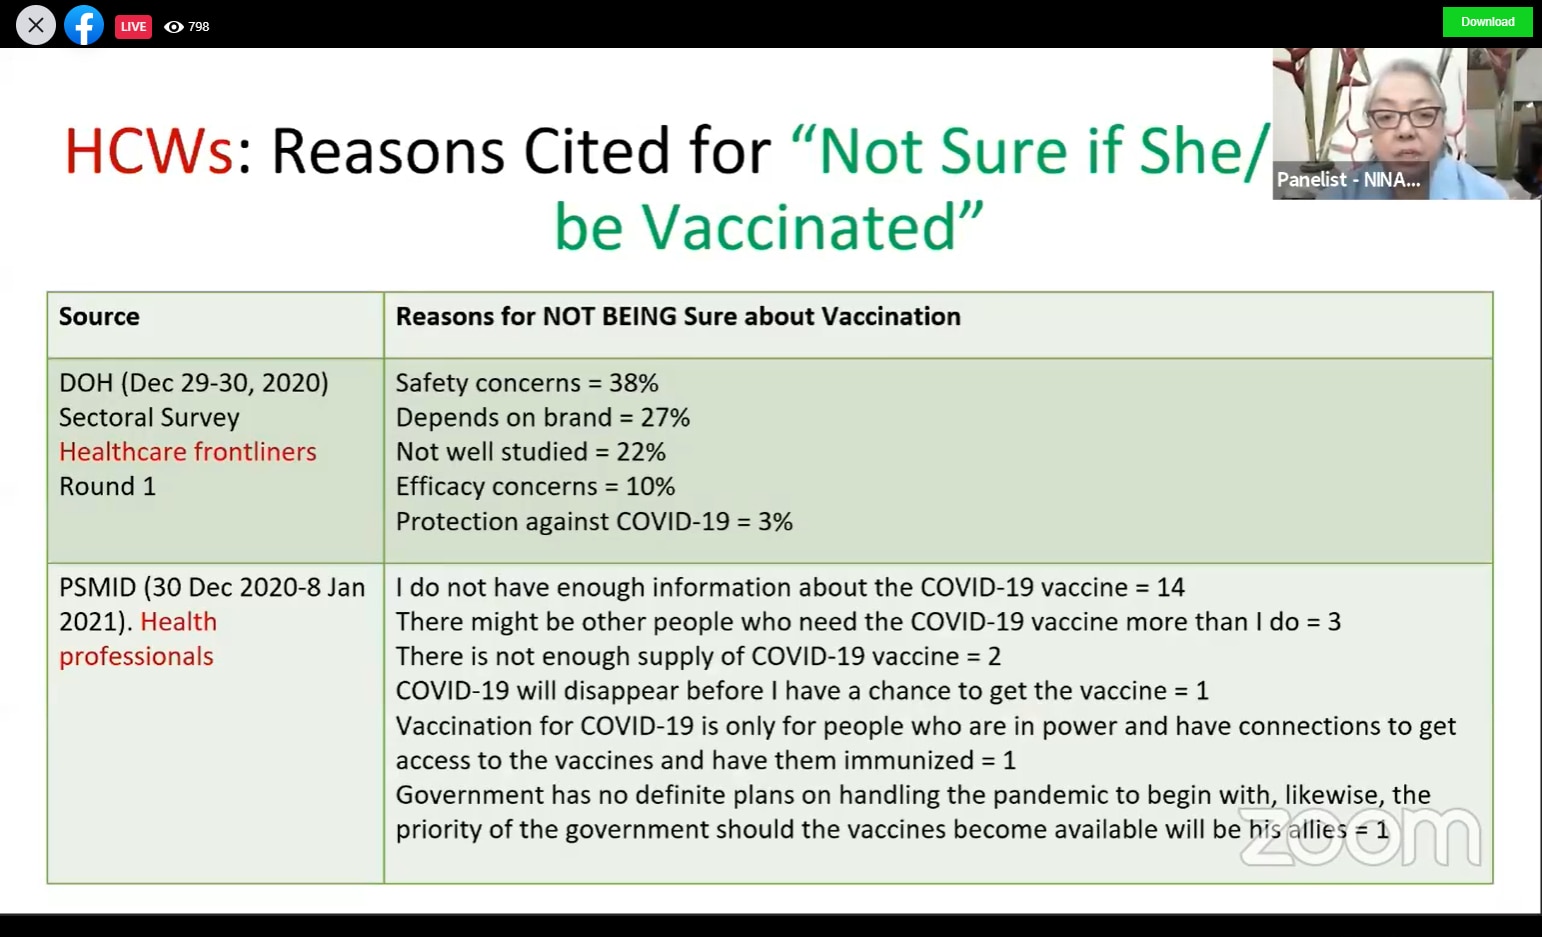 Some health workers wary of COVID-19 vaccine, but those in favor outnumber them - polls 4